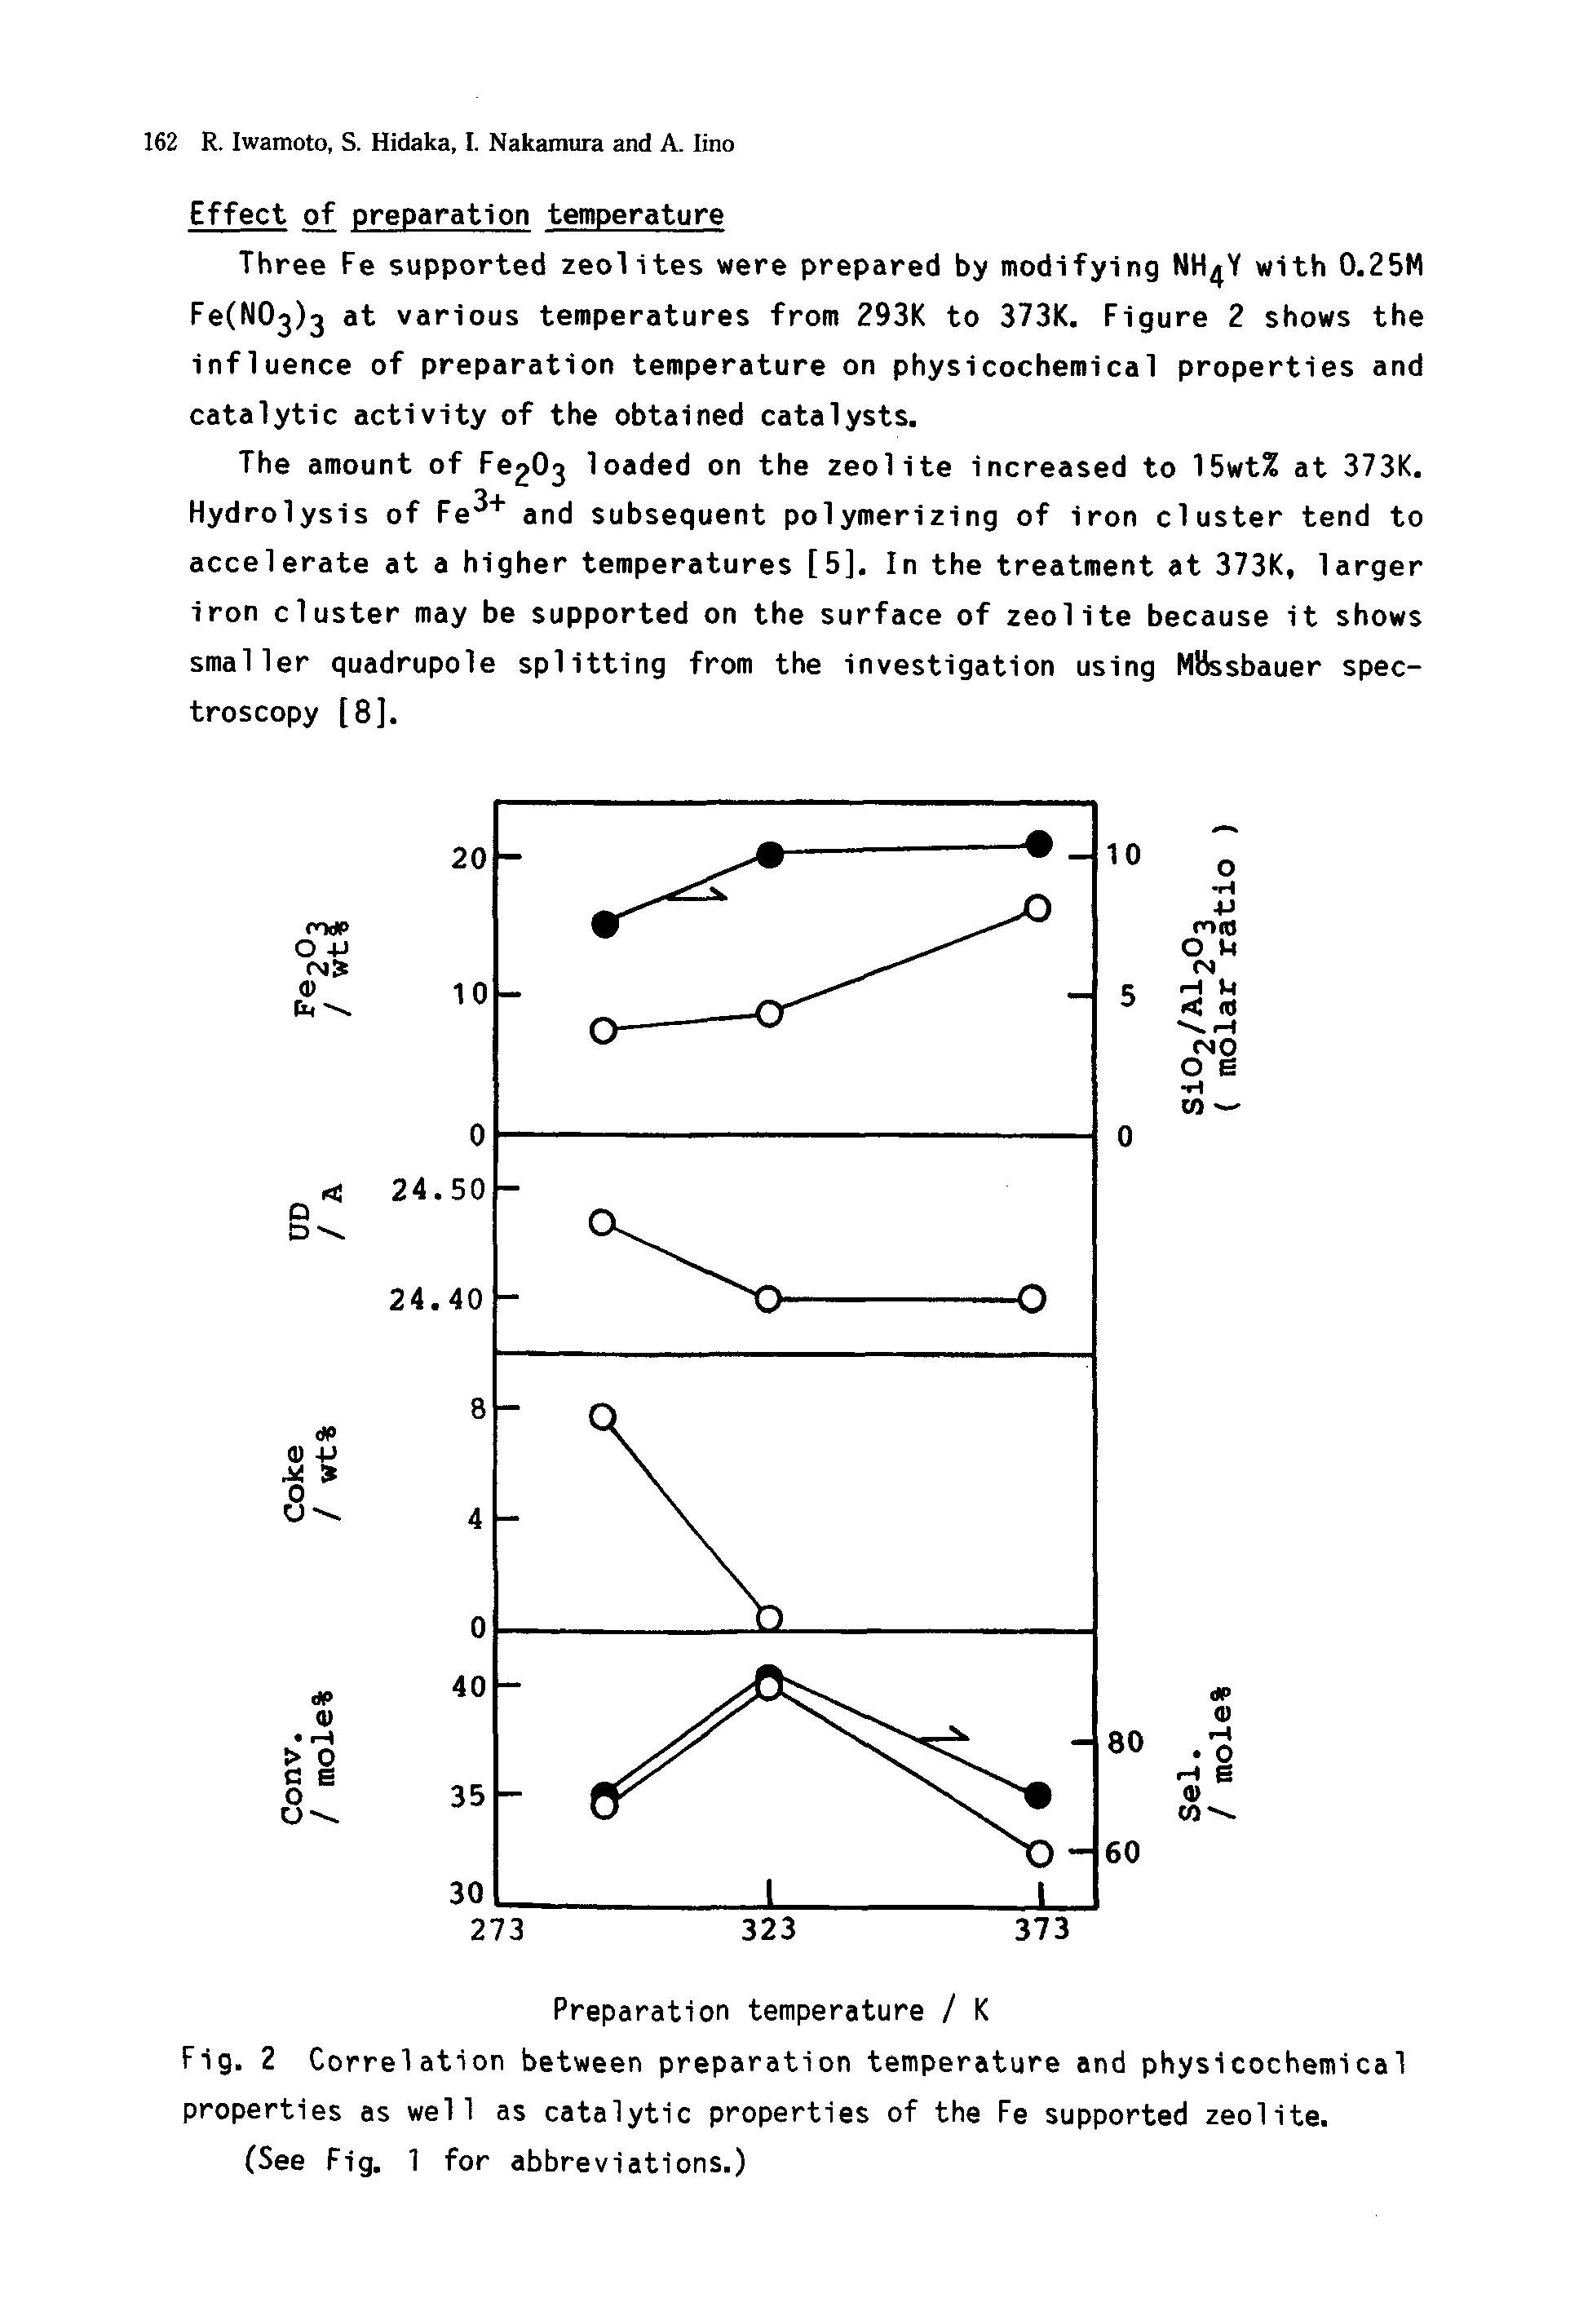 Fig. 2 Correlation between preparation temperature and physicochemical properties as well as catalytic properties of the Fe supported zeolite.